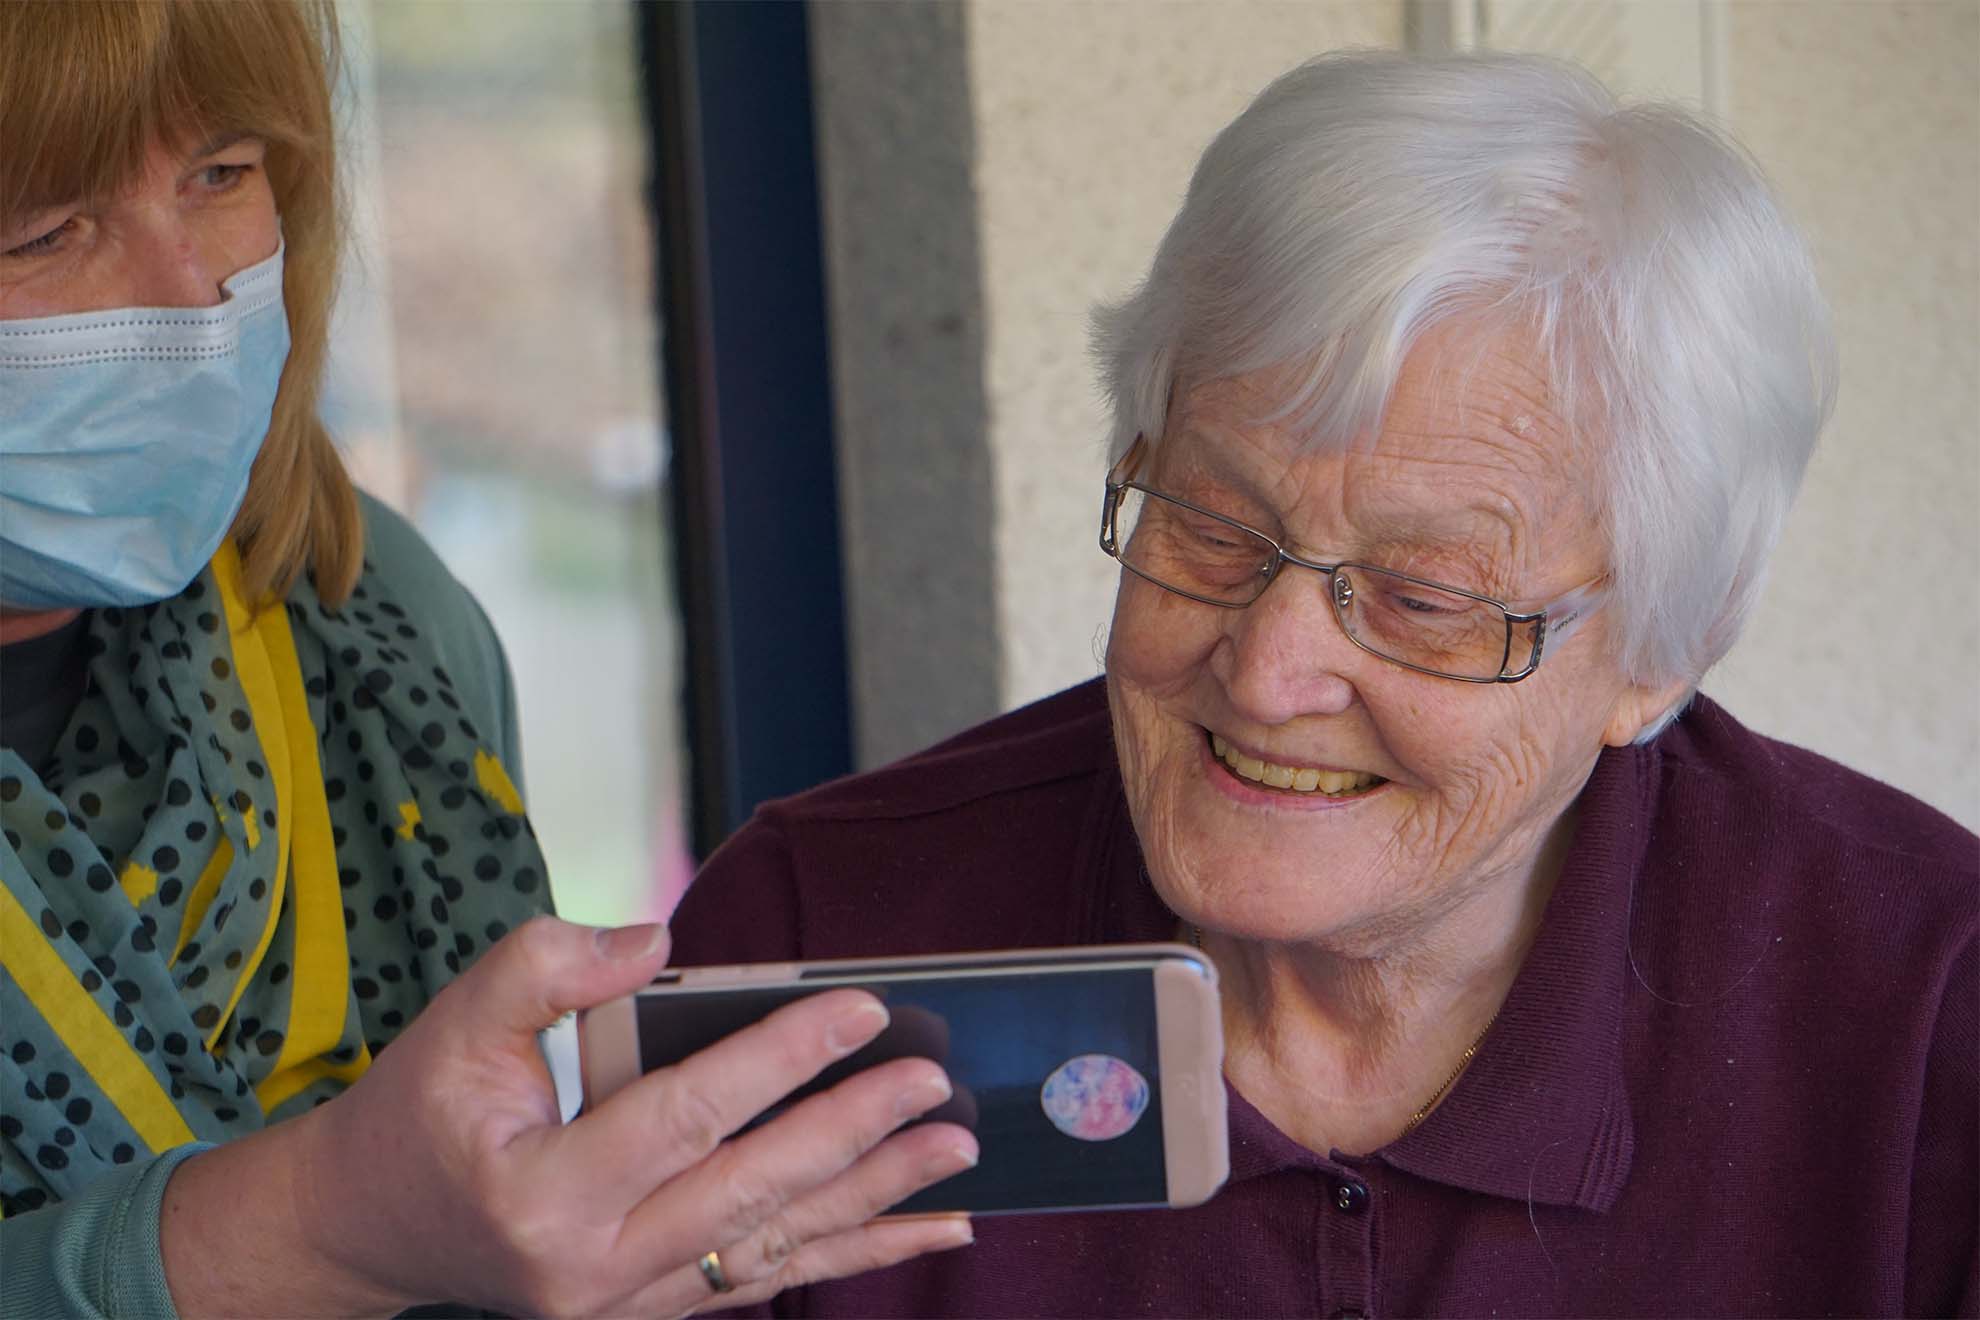 resident smiling after looking at a mobile phone